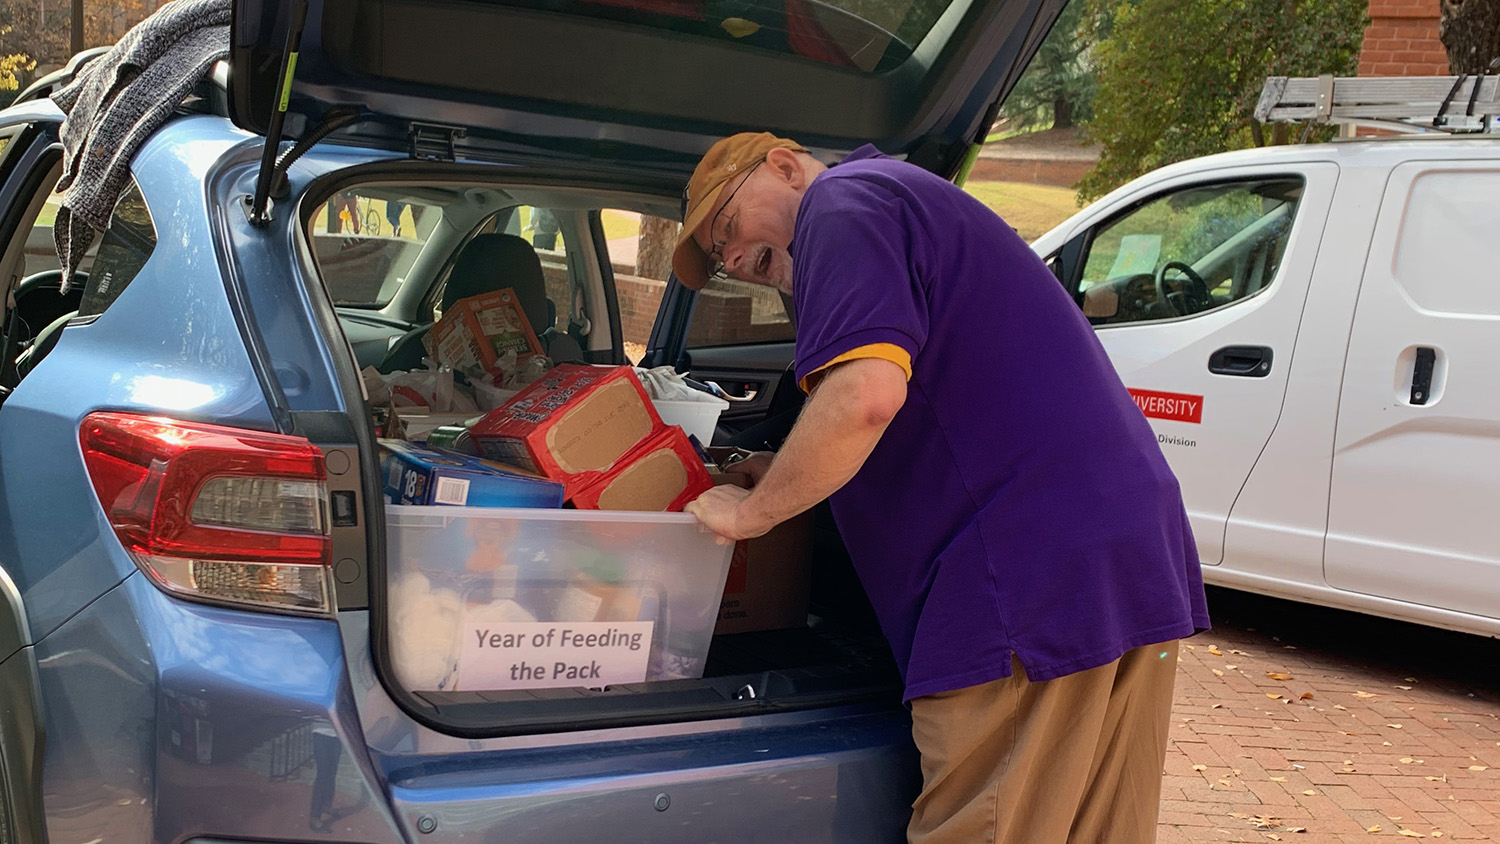 Person removing food donations from car trunk